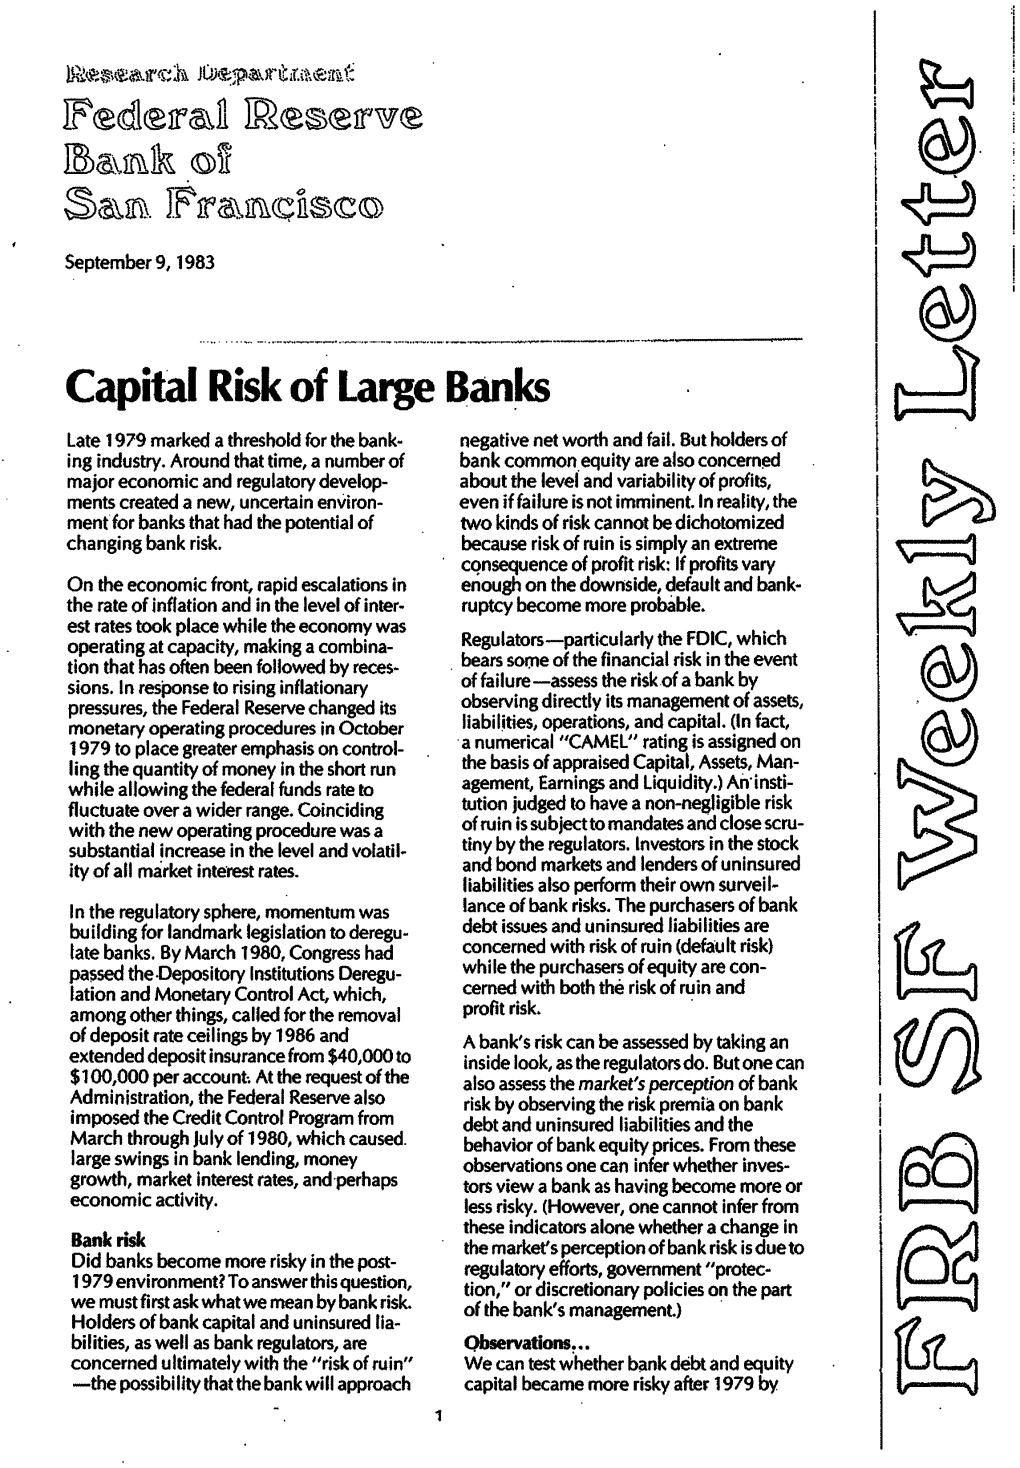 Capital Risk of Large Banks